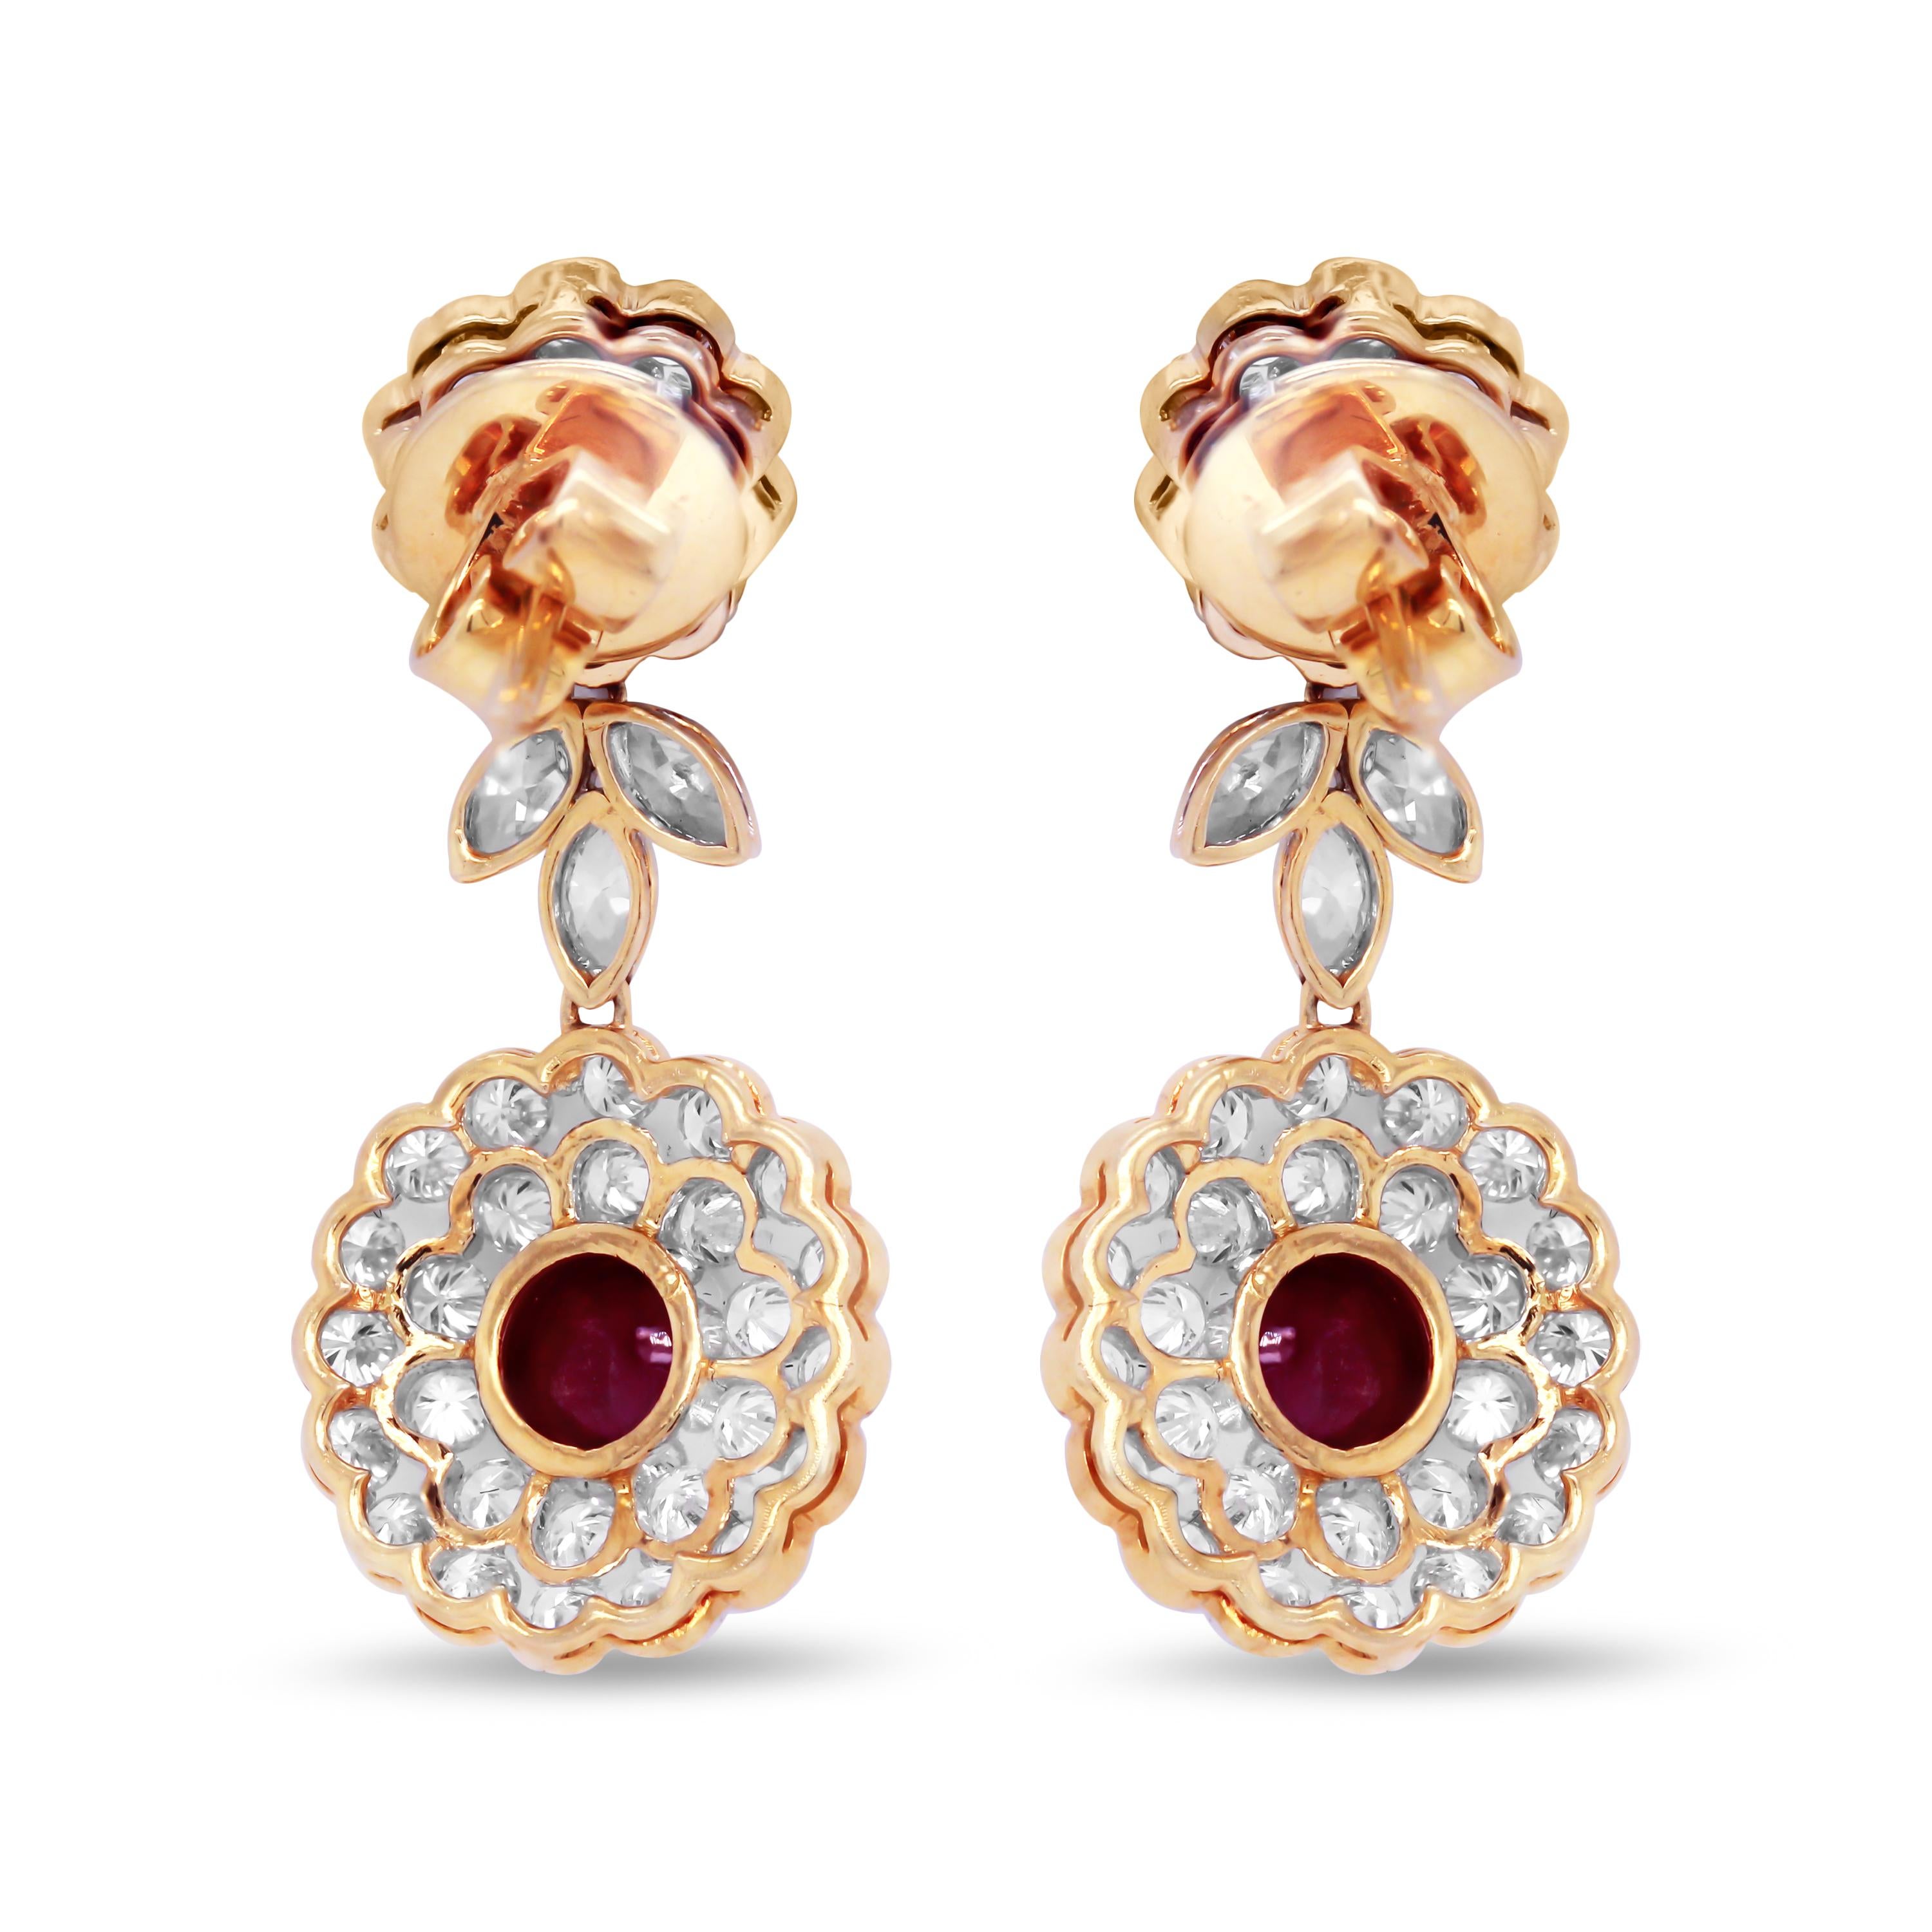 18K White and Yellow Two-Tone Gold and Diamond Earrings with Cabochon Rubies

These one-of-a-kind earrings are a staple of true excellence with truly high-quality rubies set in 18k gold and surrounded by diamonds all throughout.

6.10 carat Ruby